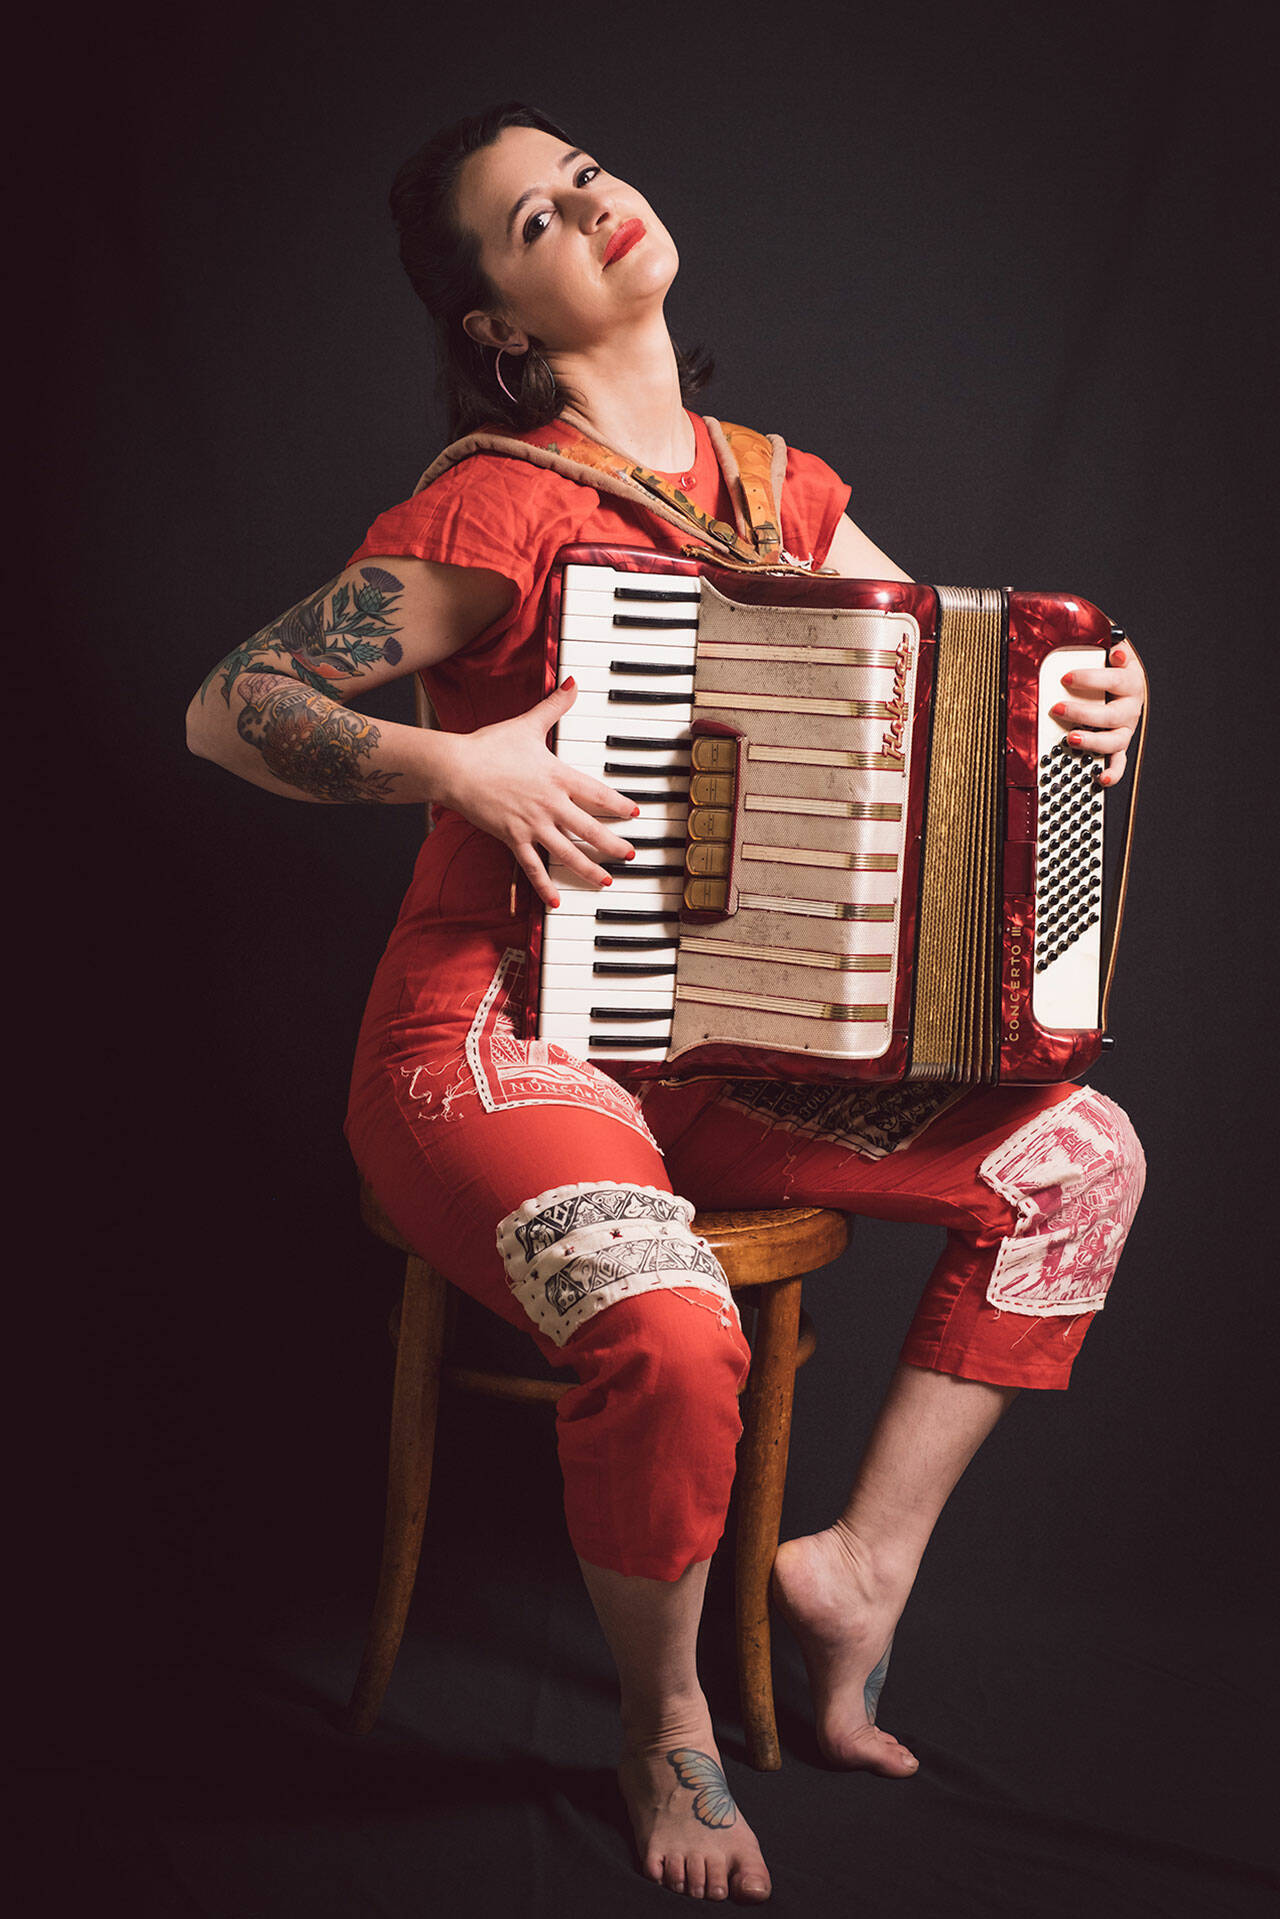 (Courtesy Photo) Pascuala Illabaca, a composer, singer, accordionist and pianist, will perform at VCA with her band, Fauna.